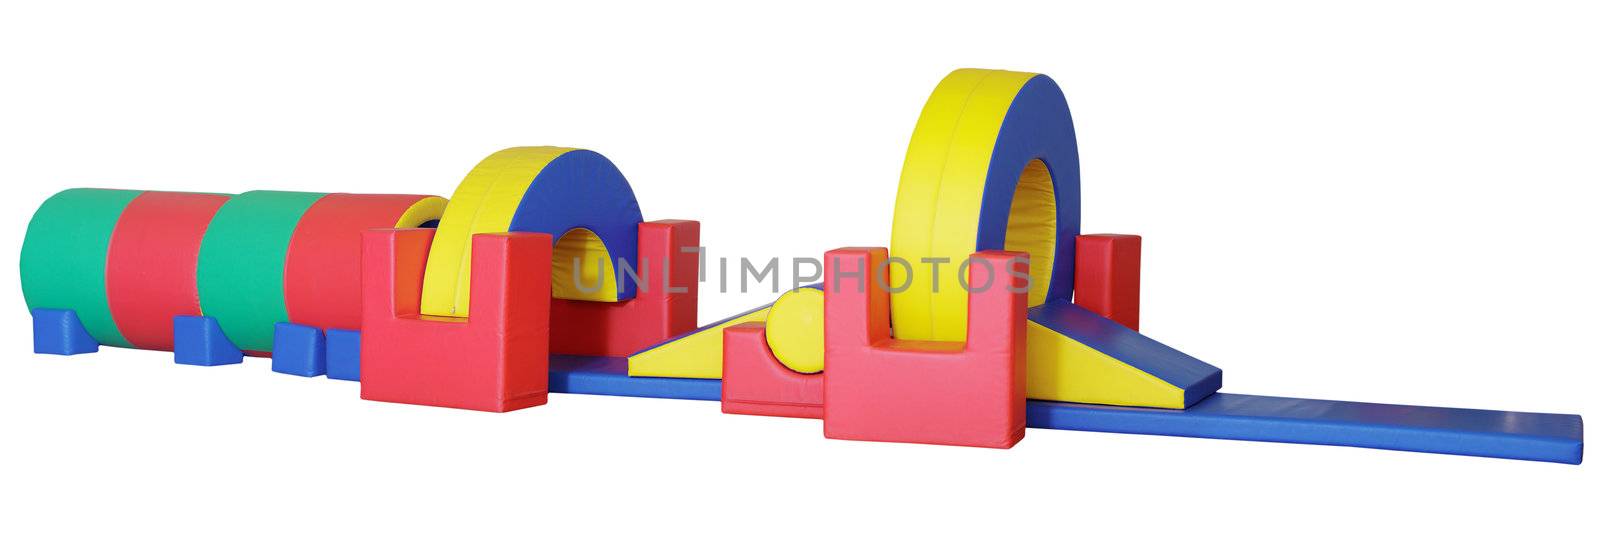 The big children's game complex - an obstacle course isolated on a white background